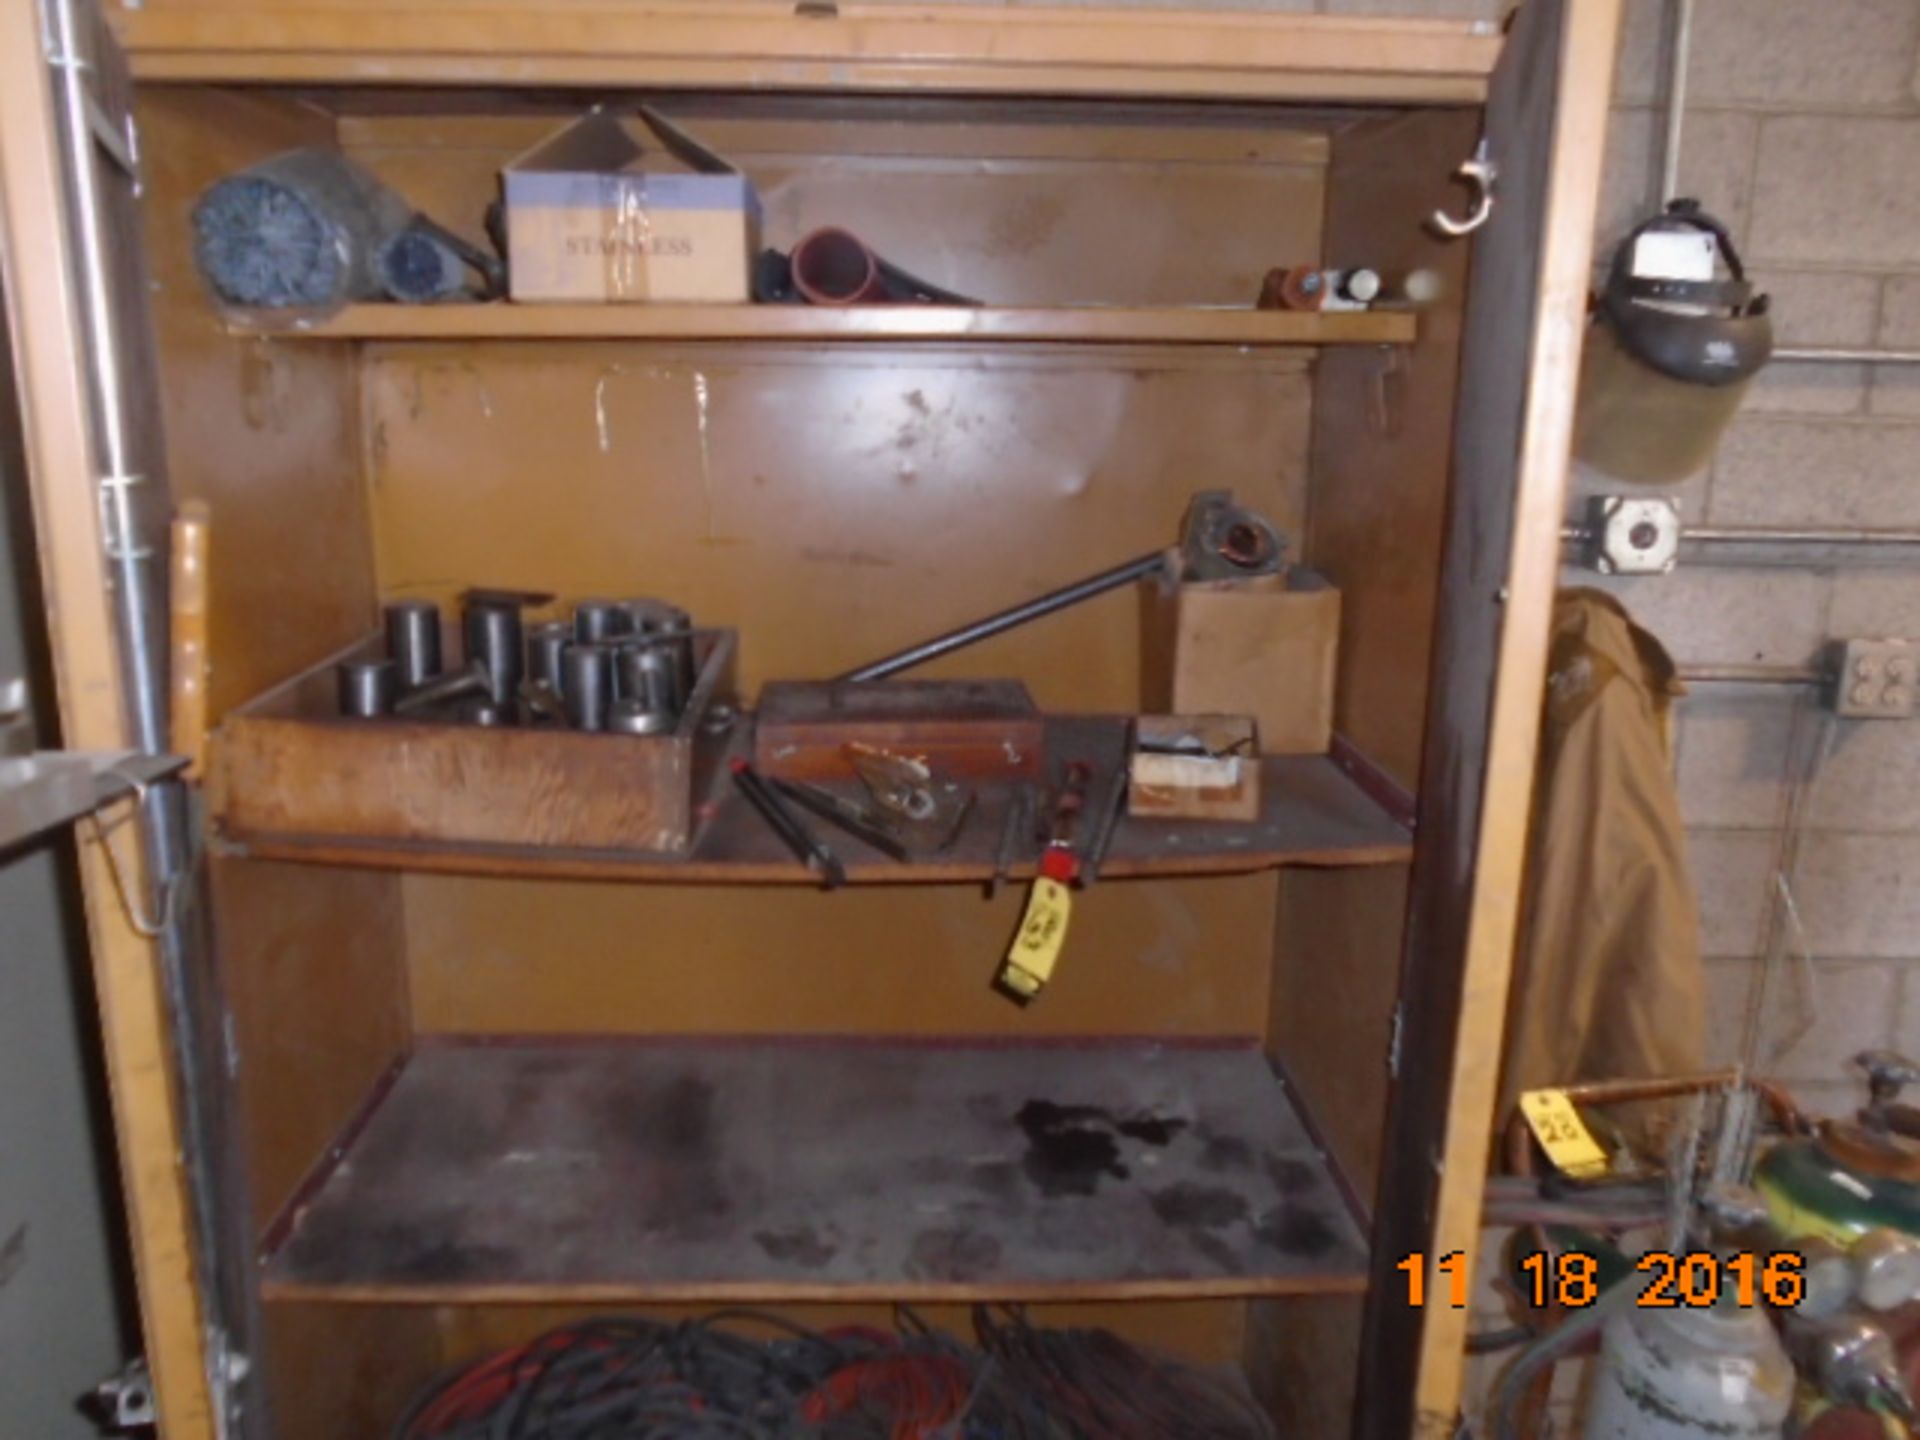 LOT CABINET W/ BROCHES, ETC.